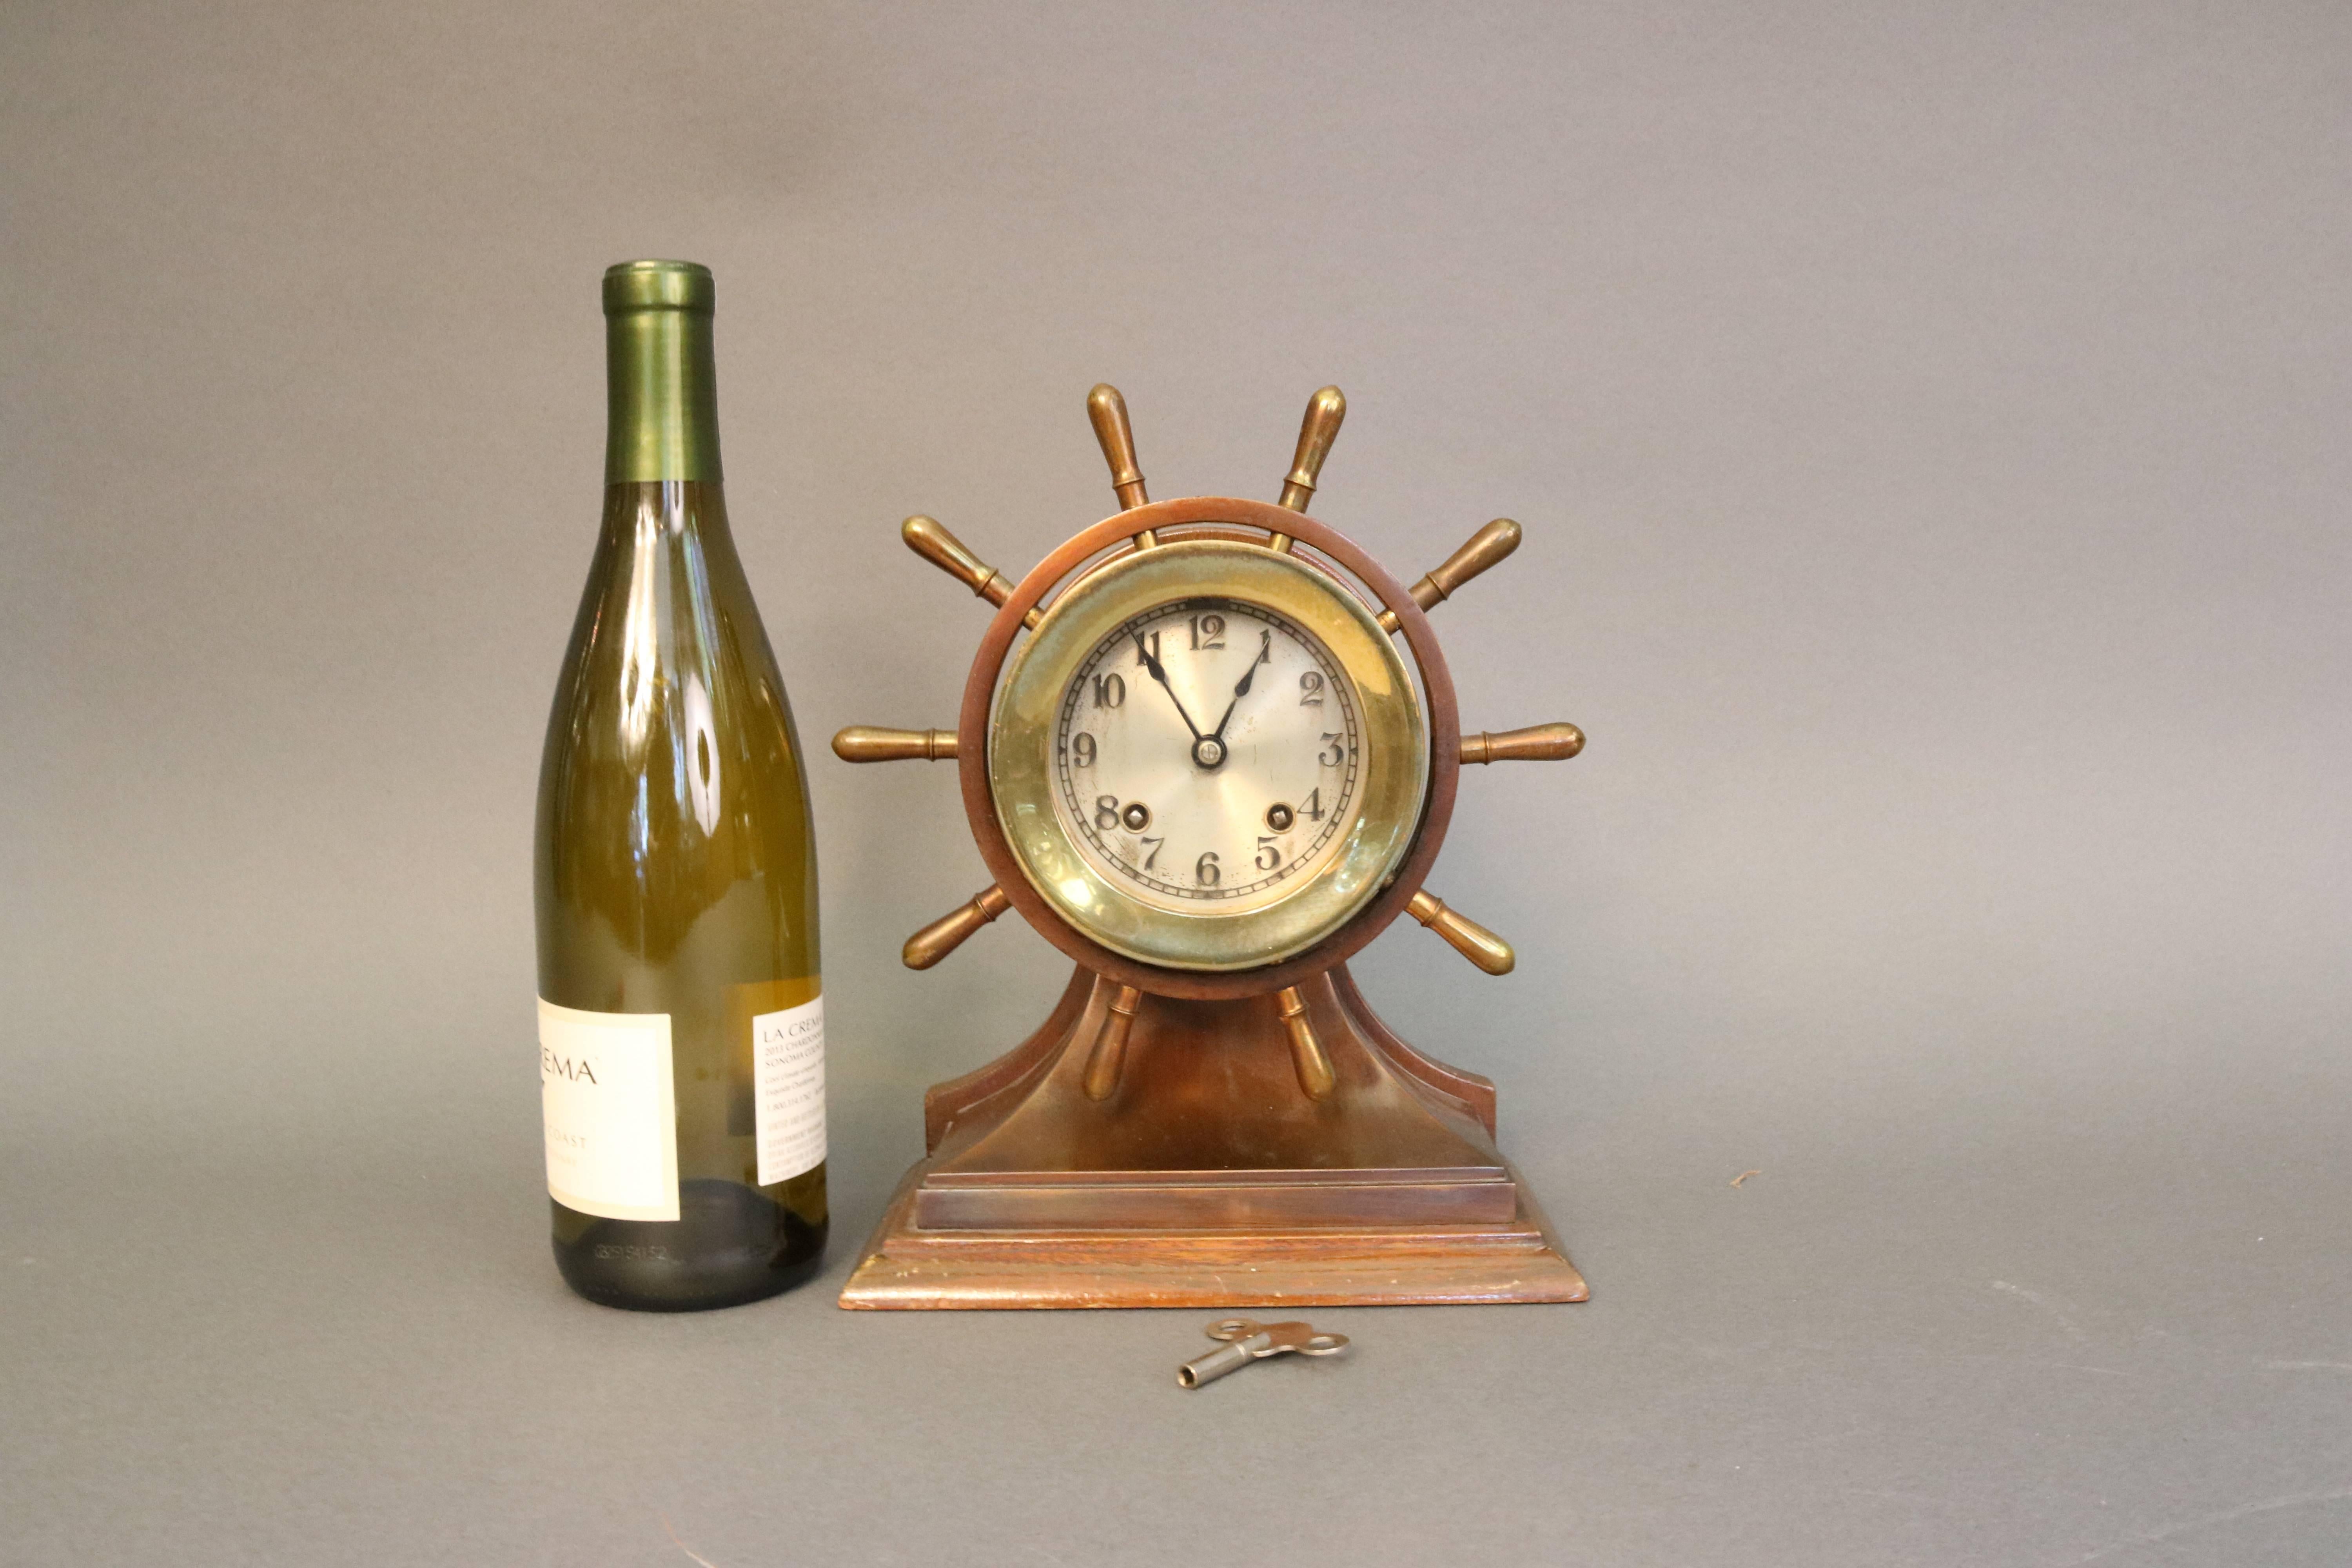 20th Century Ship's Bell Clock with Wheel